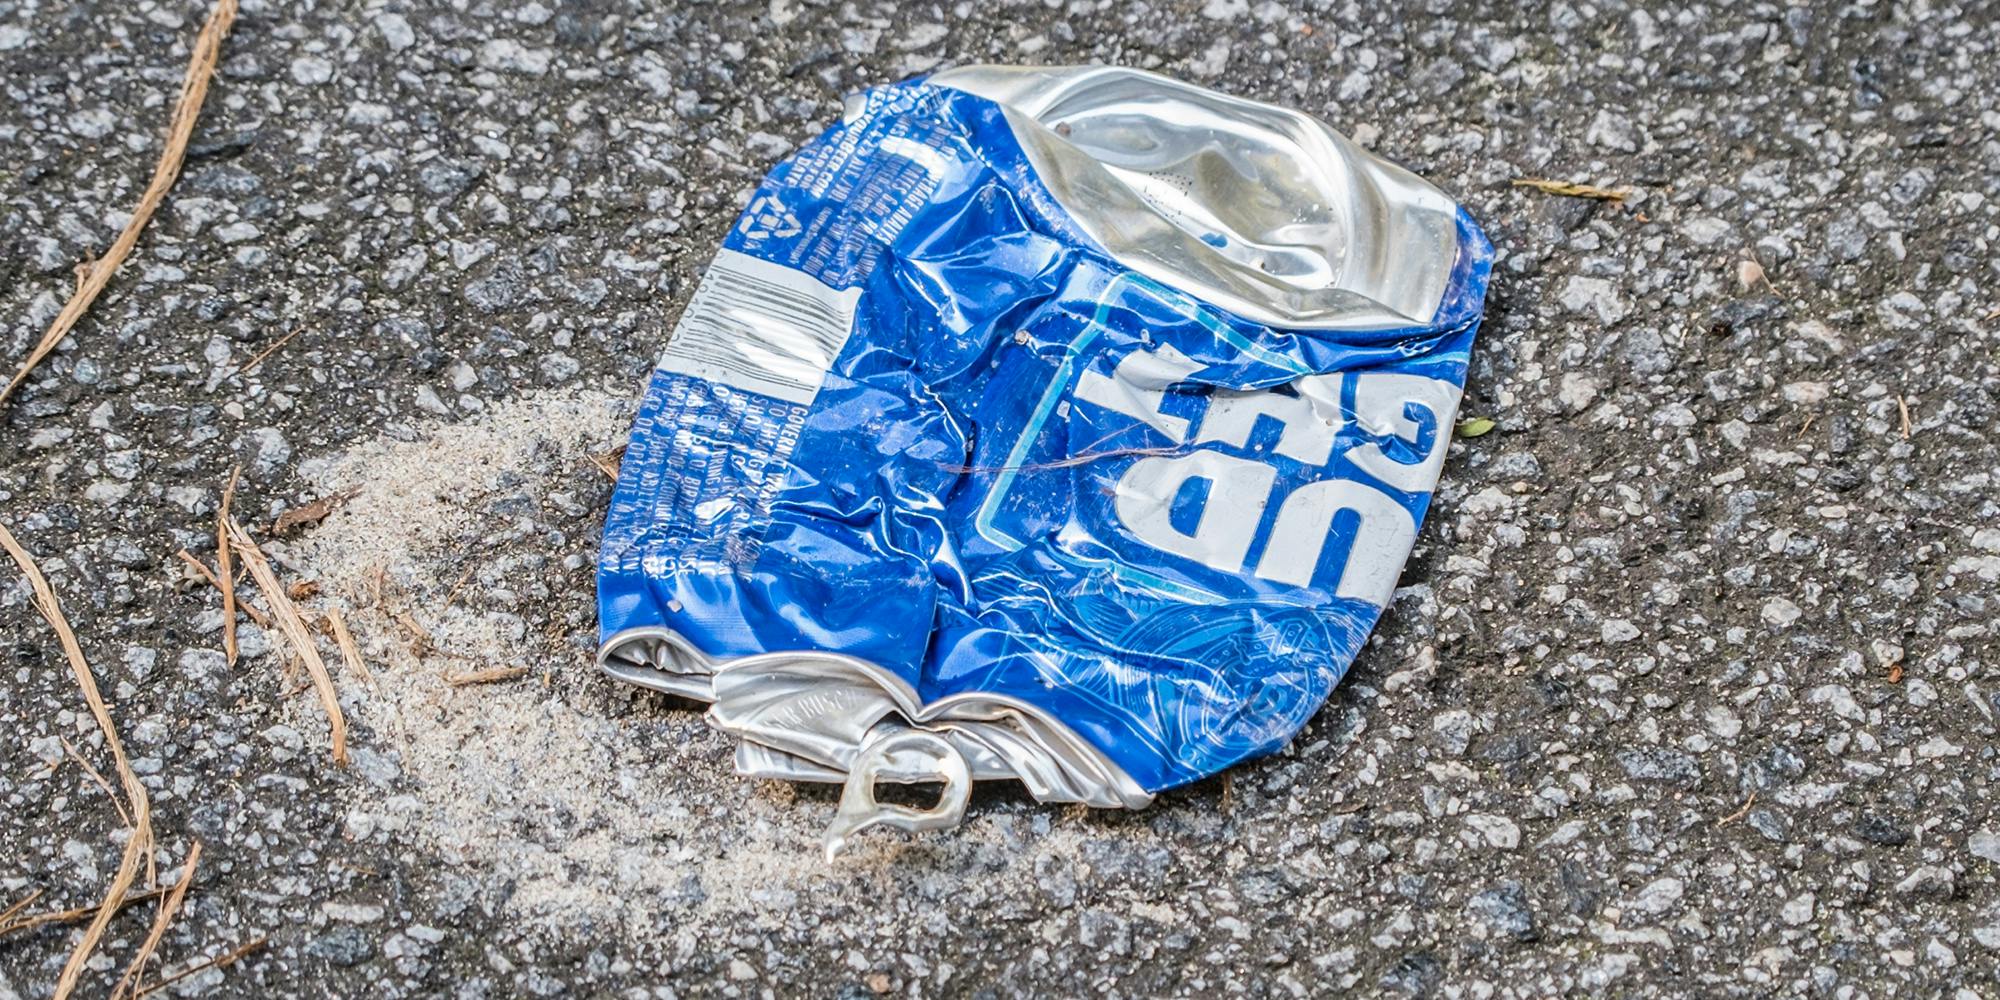 A blue bud light beer can dumped in the parking lot